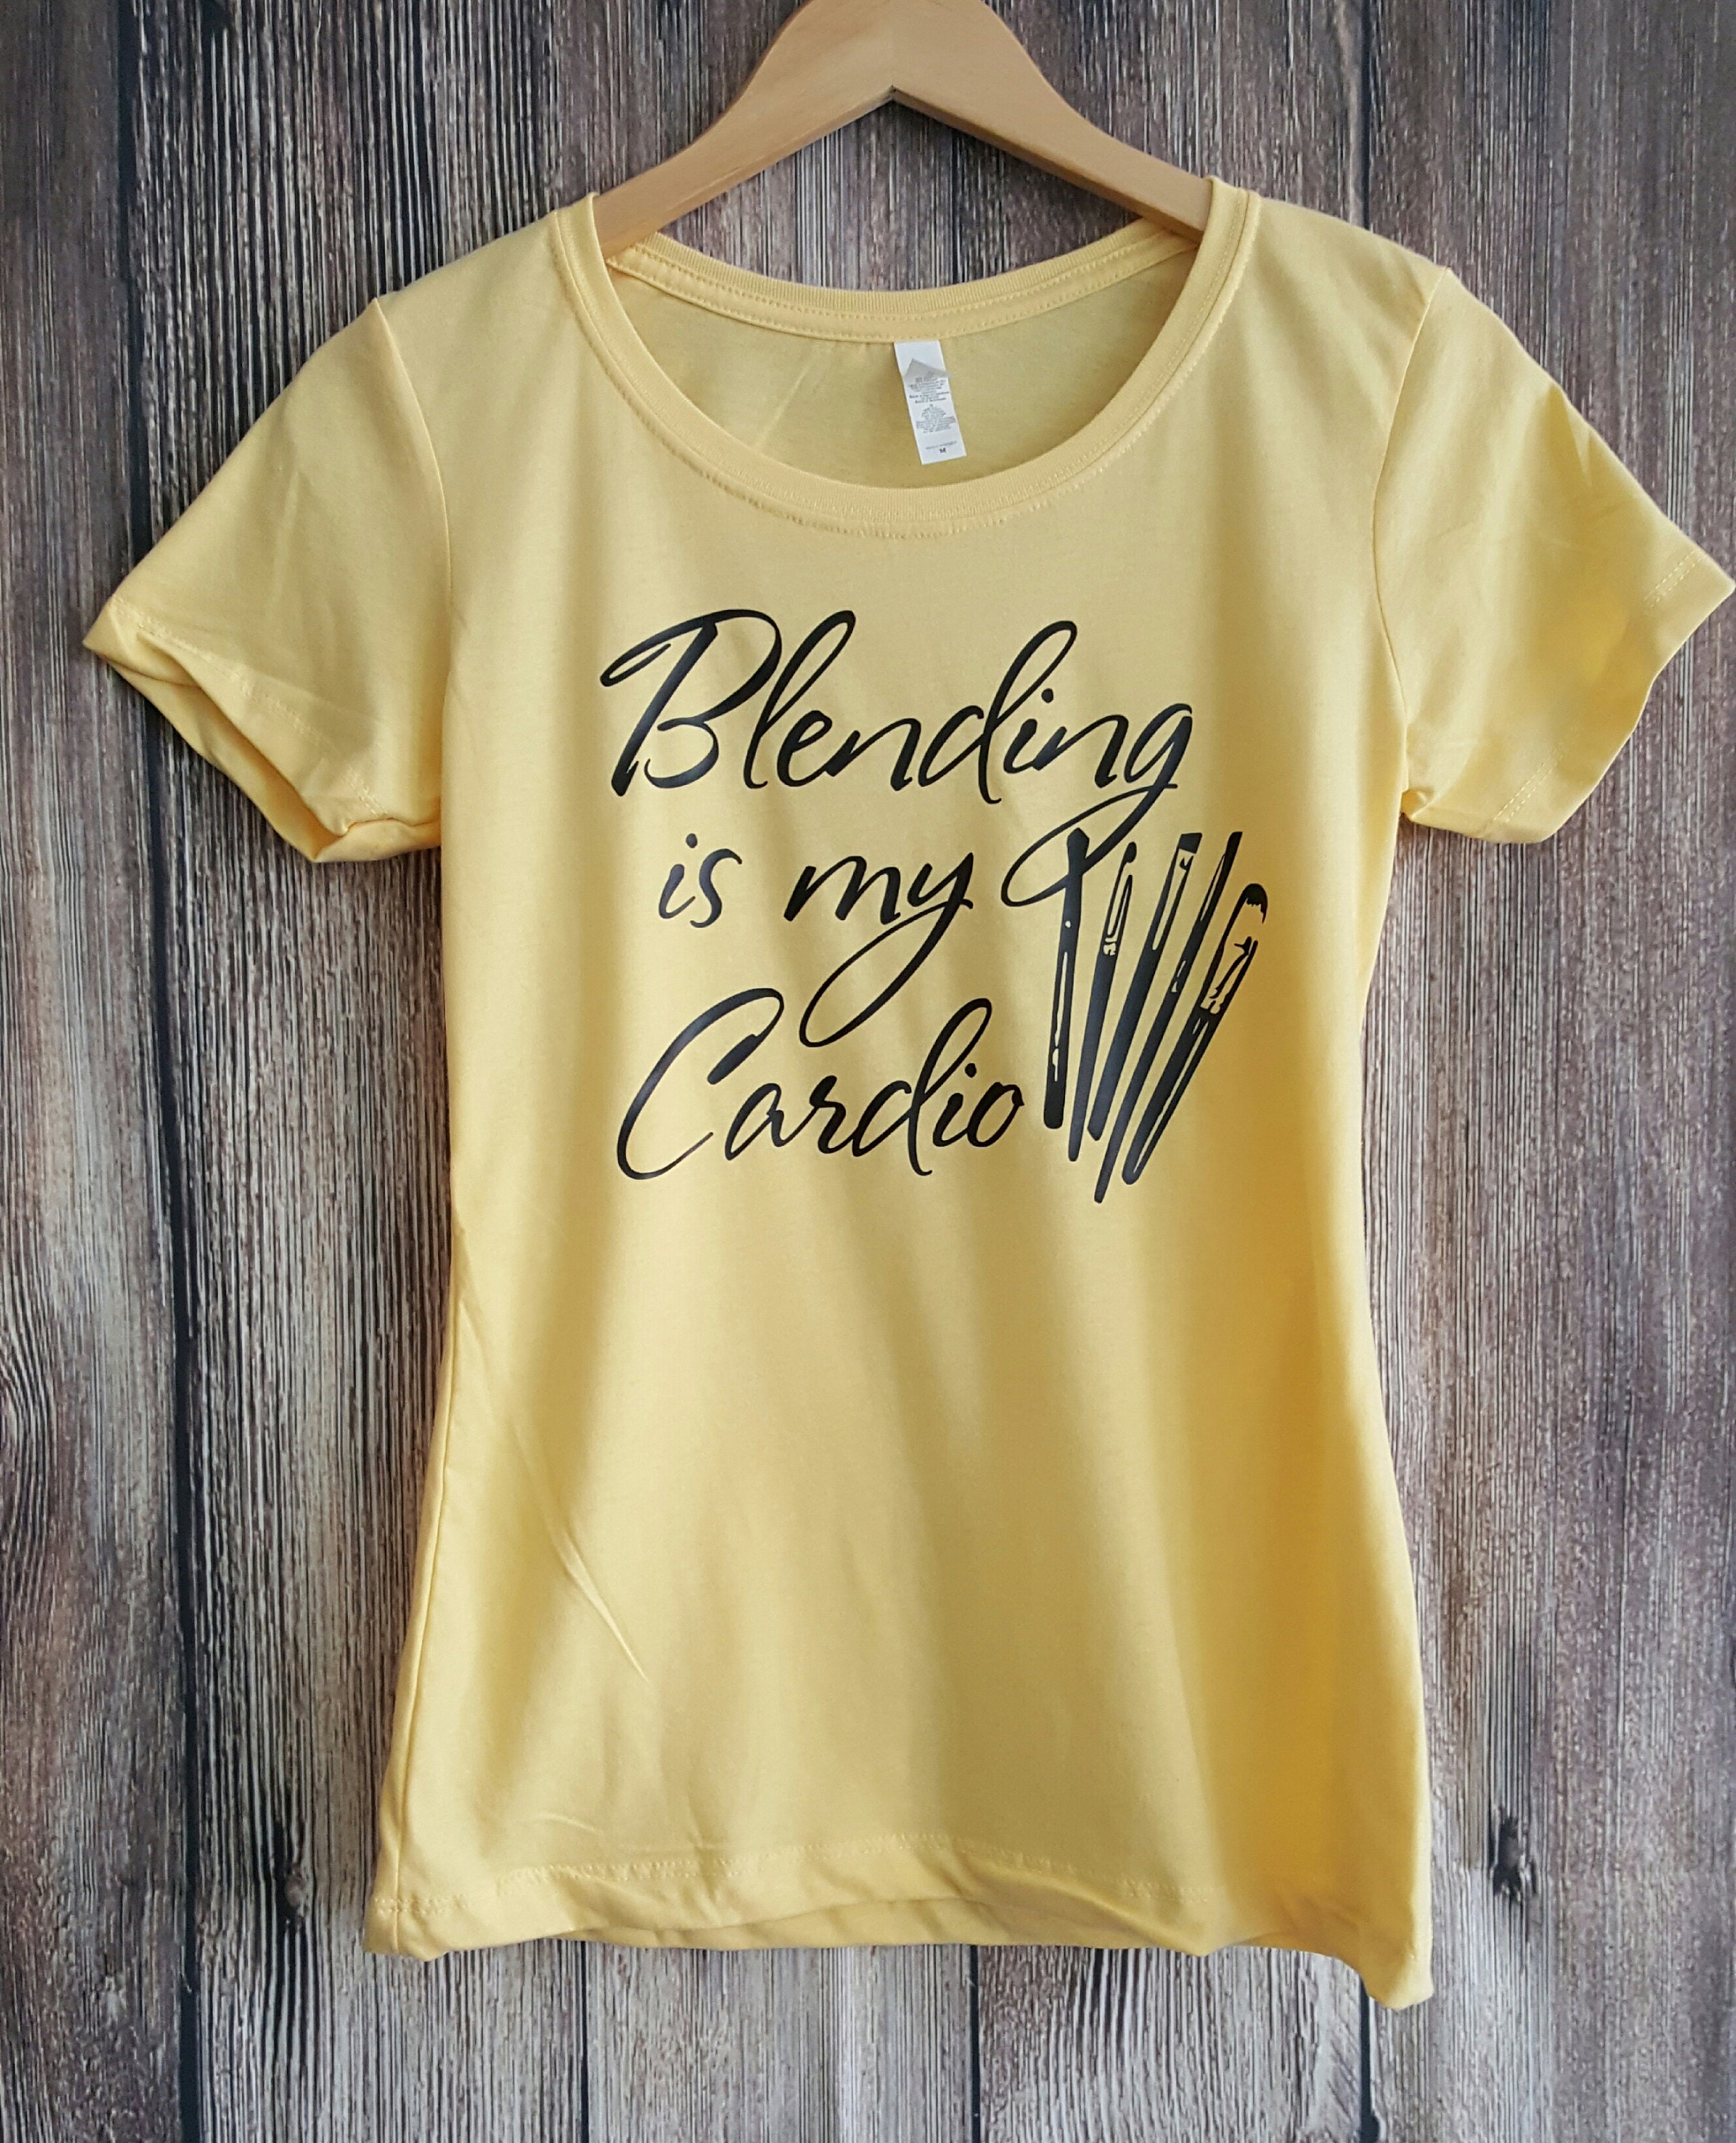 Blending Is My Cardio Make Up Brushes Graphic Tee Yellow & Black T-Shirt, Christmas Gift Mother's Day For Makeup Artist Women Teen